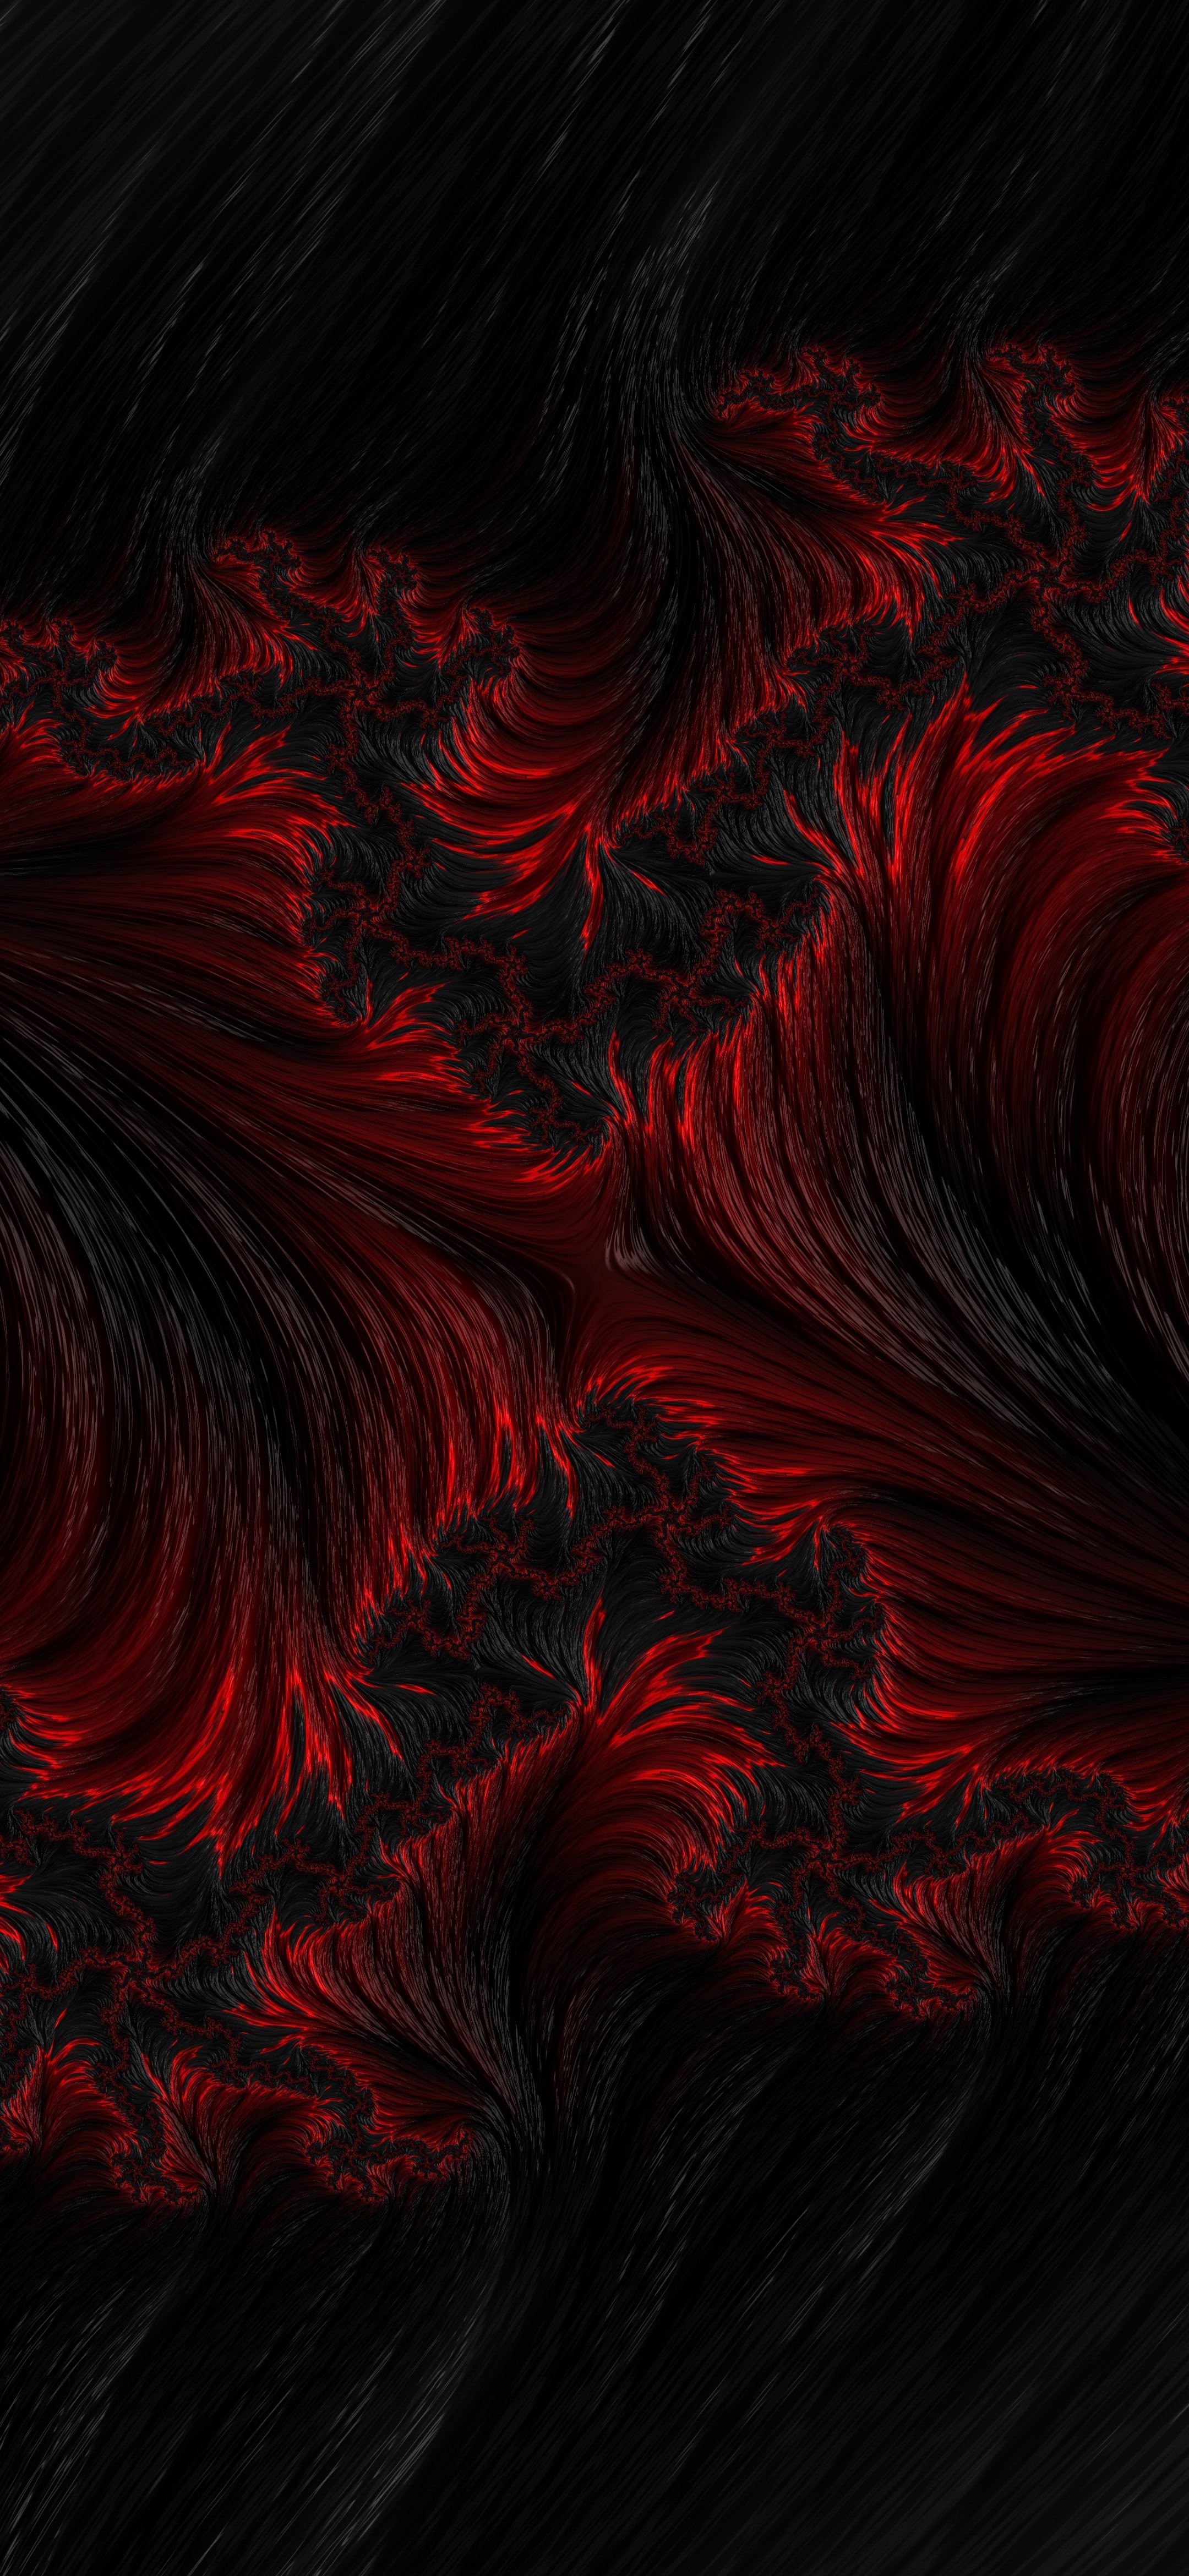 wavy, black, abstract, red, fractal UHD